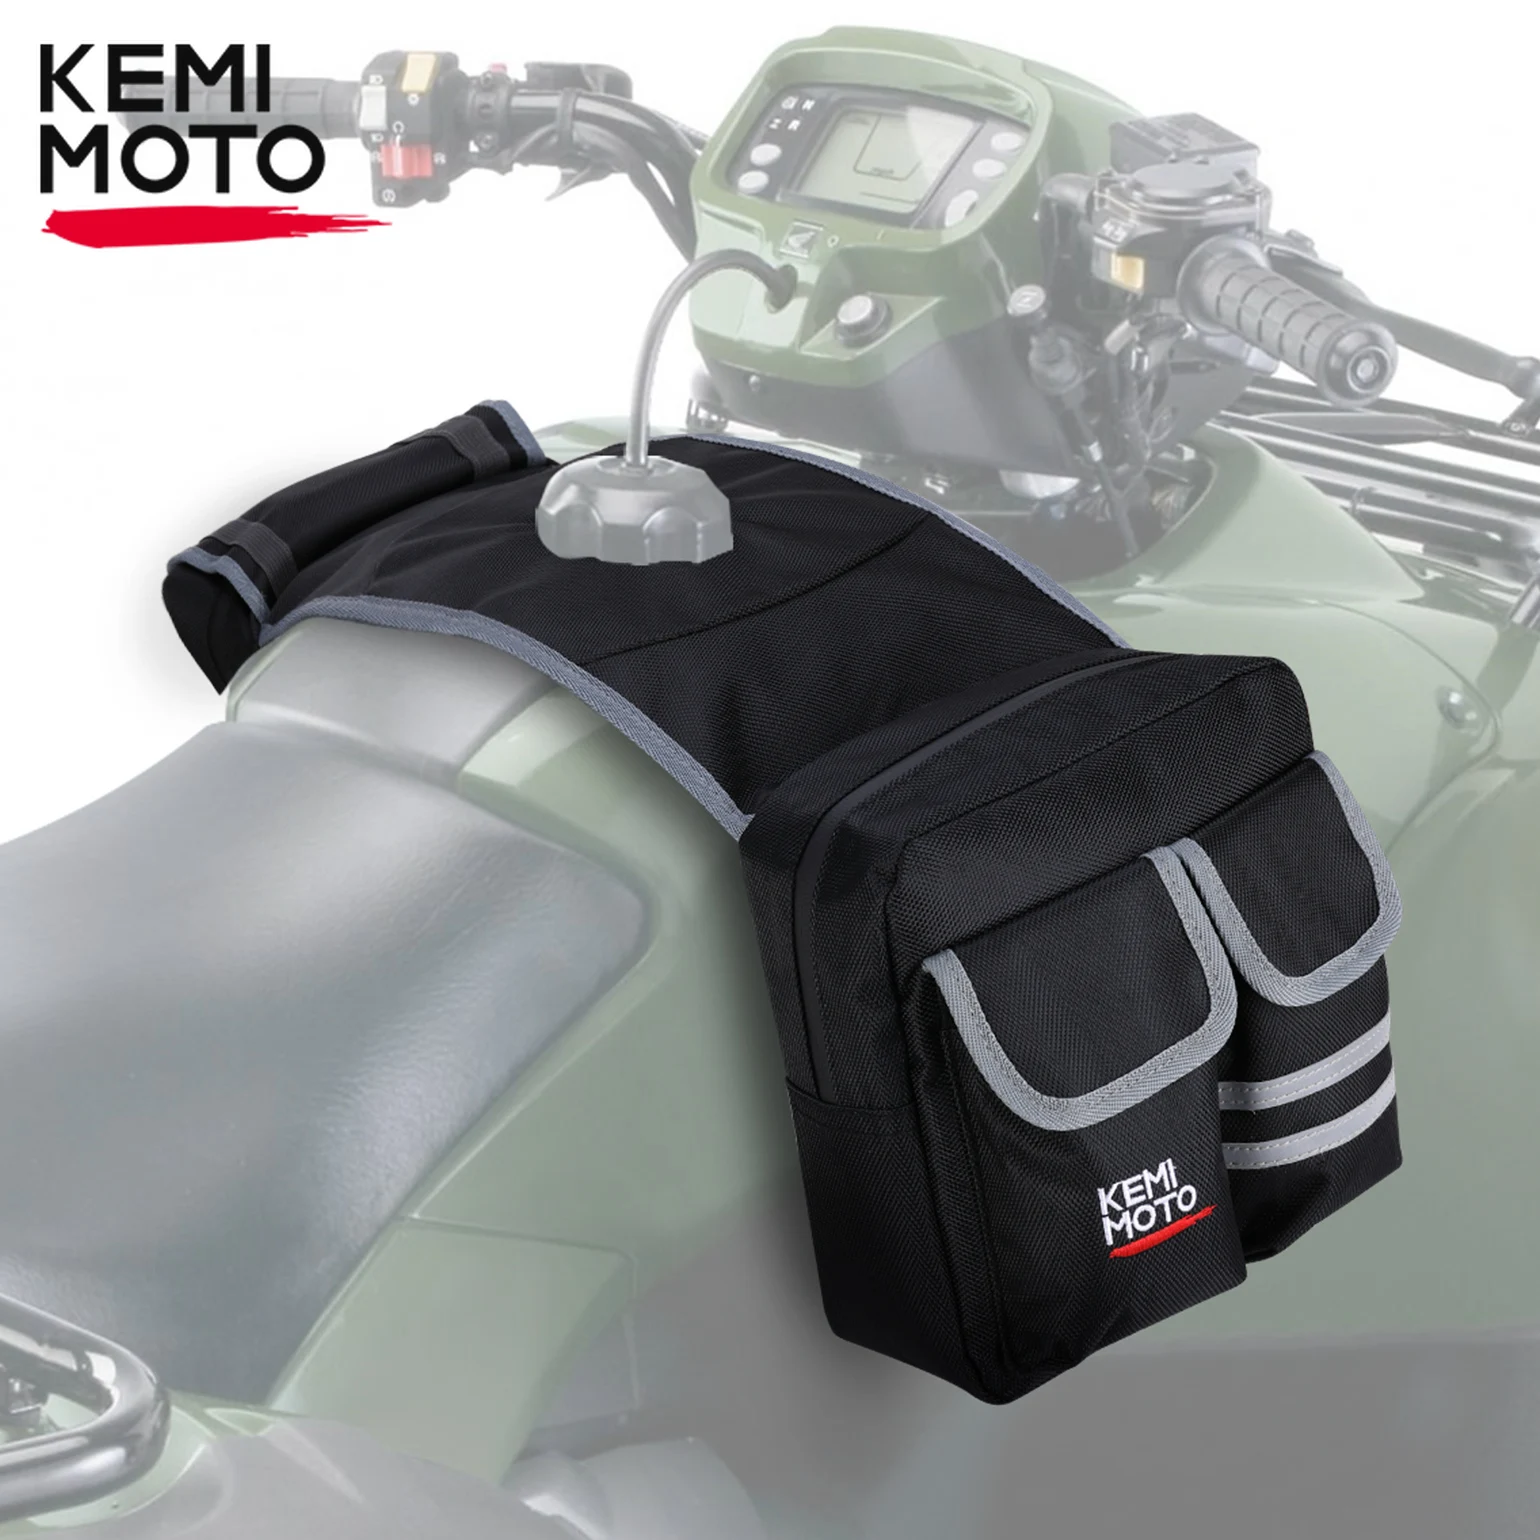 KEMIMOTO ATV Fuel Tank Bag Compatible with Polaris Sportsman XP 1000 500 800 for Can Am for Yamaha Raptor 700 700R for linhai for yamah raptor 700 2006 2011 2013 2023 700r engine expansion radiator tank guard cover protector dirt road atv accessories